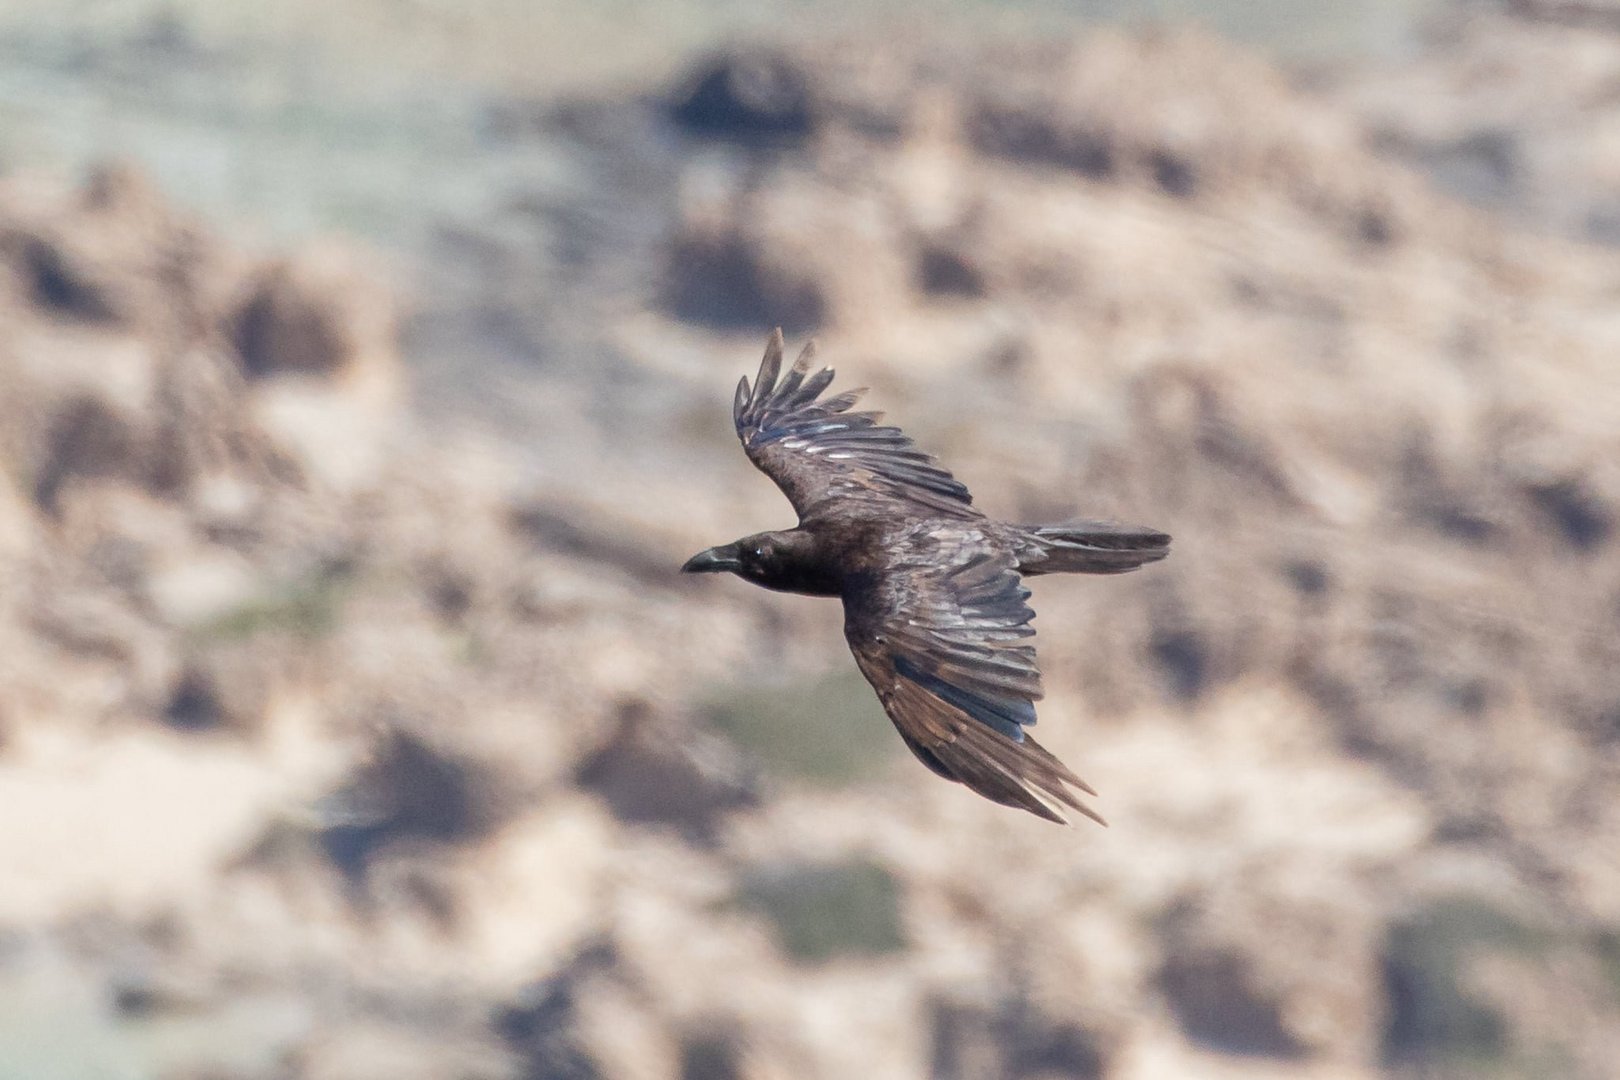 image ‘Rare’ nesting of ravens sighted after 16 years